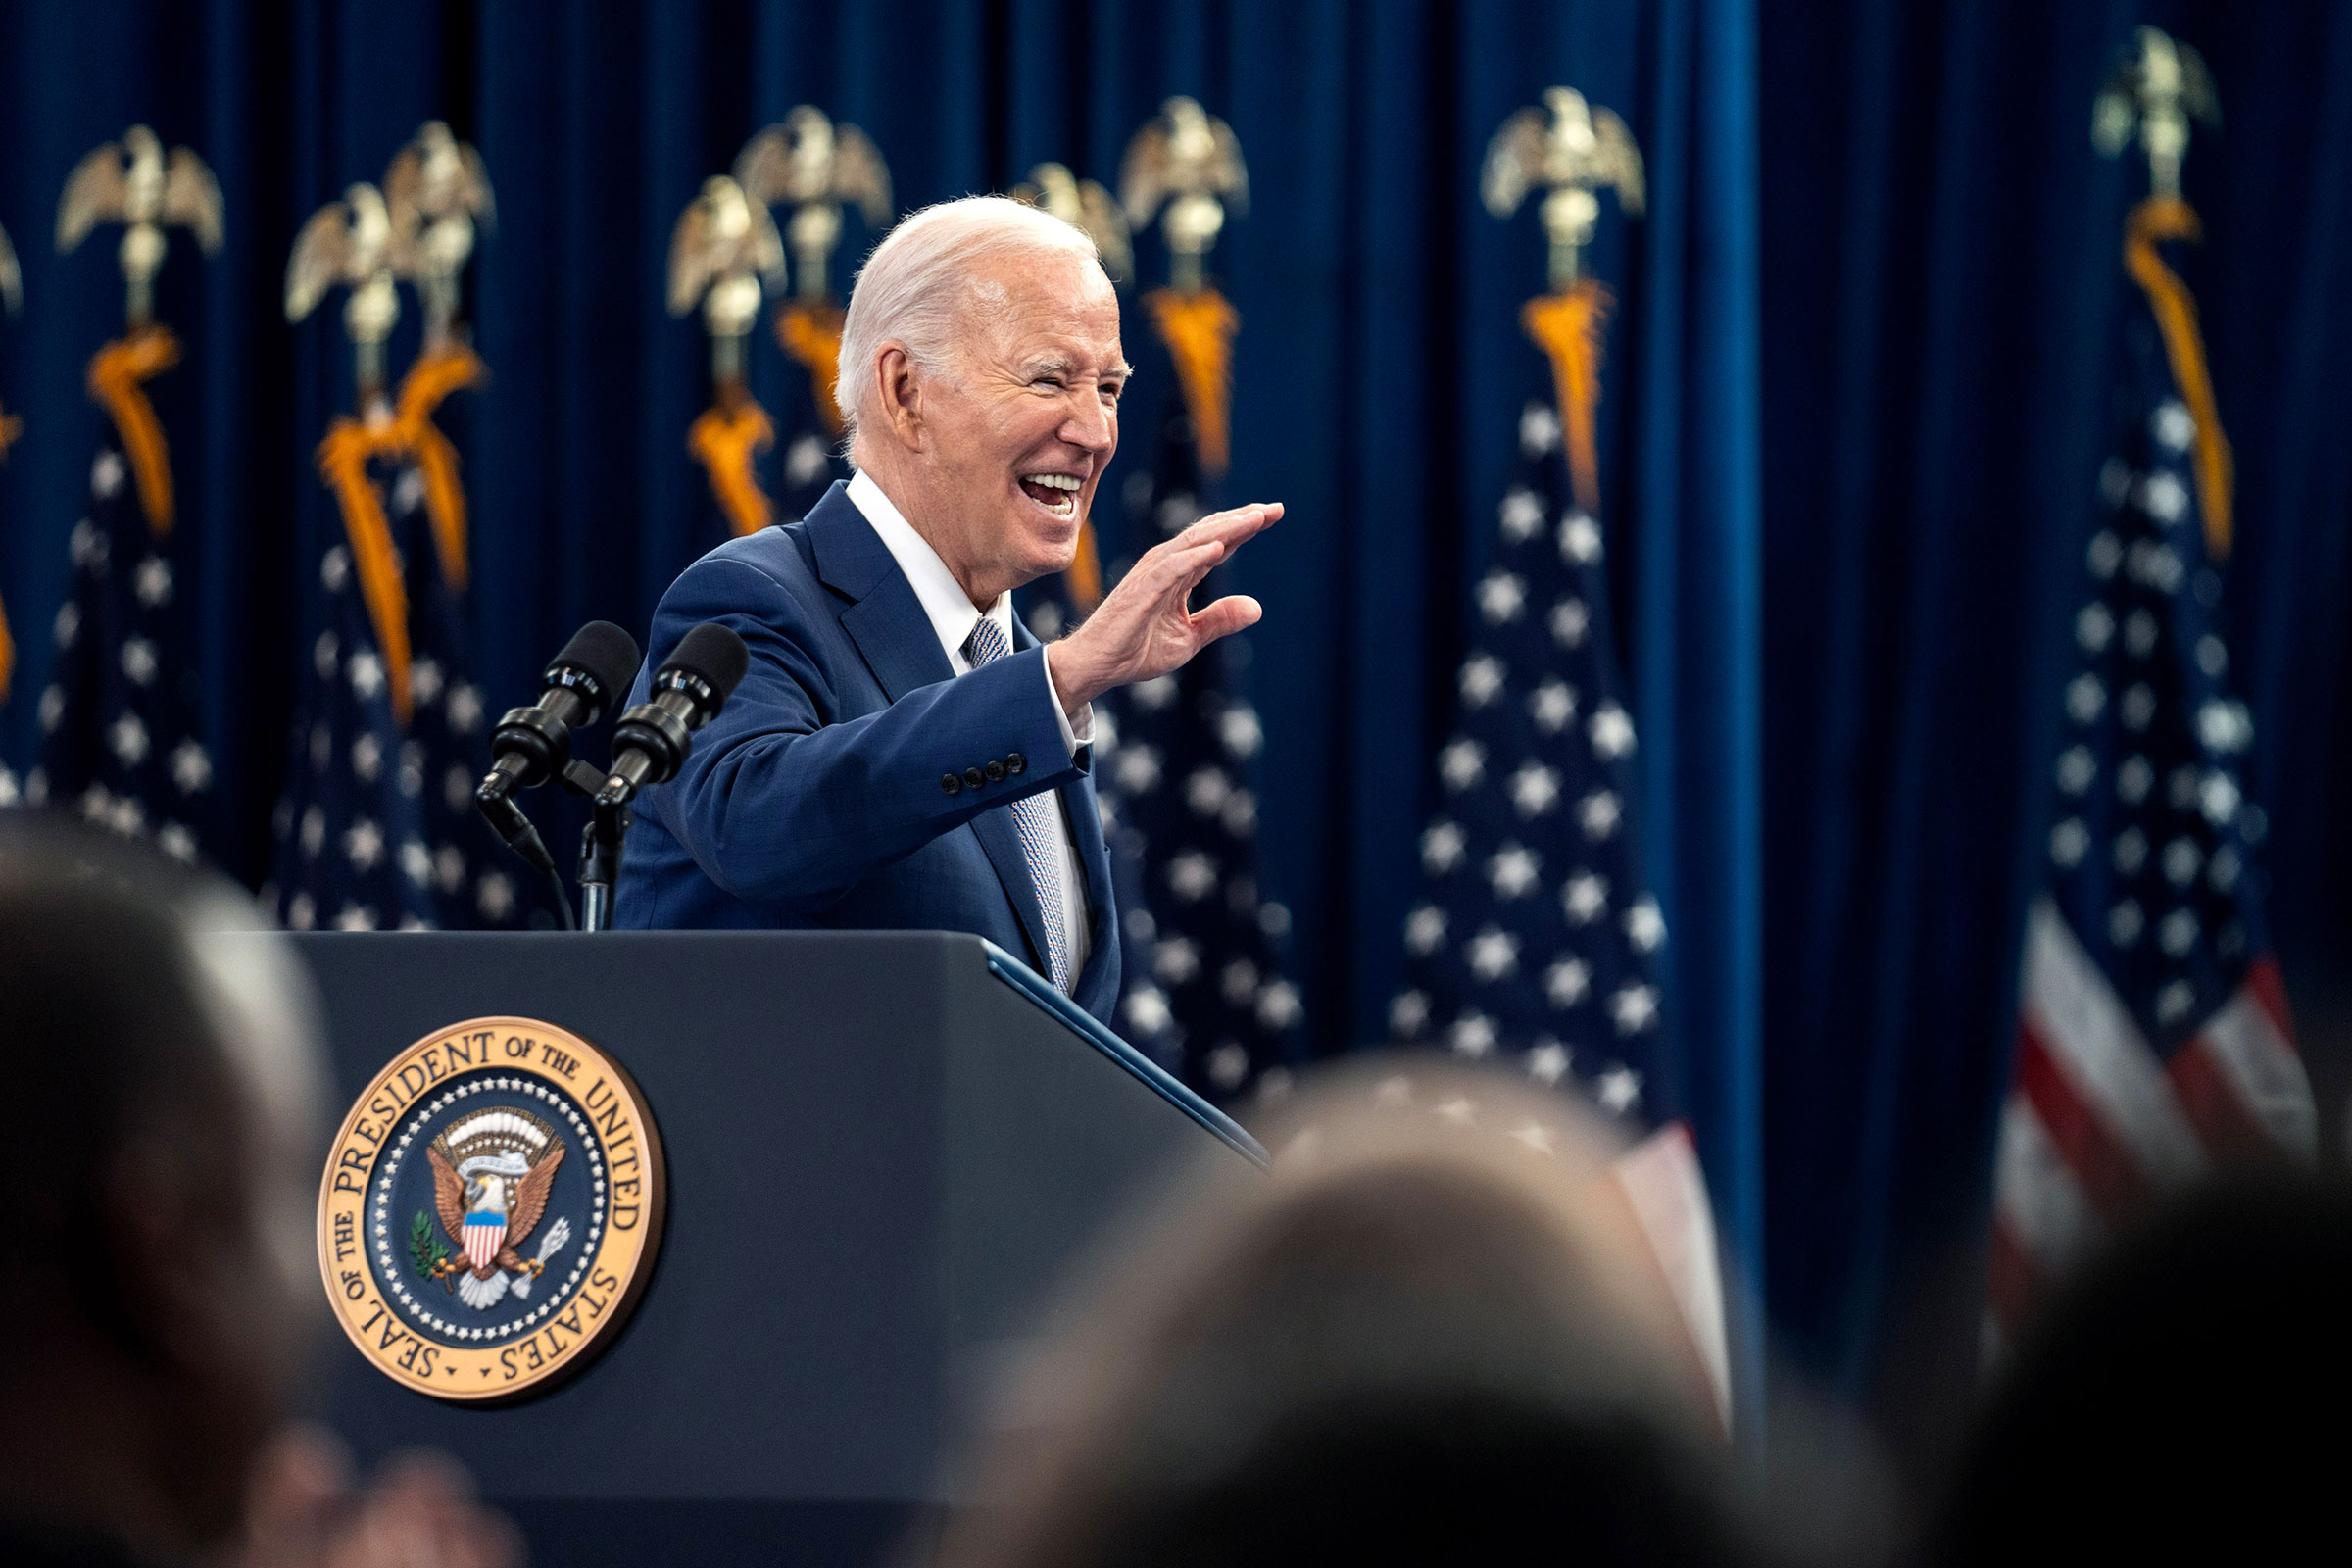 President Joe Biden speaks on his economic plan for the country at Abbot's Creek Community Center on January 18 in Raleigh, North Carolina.